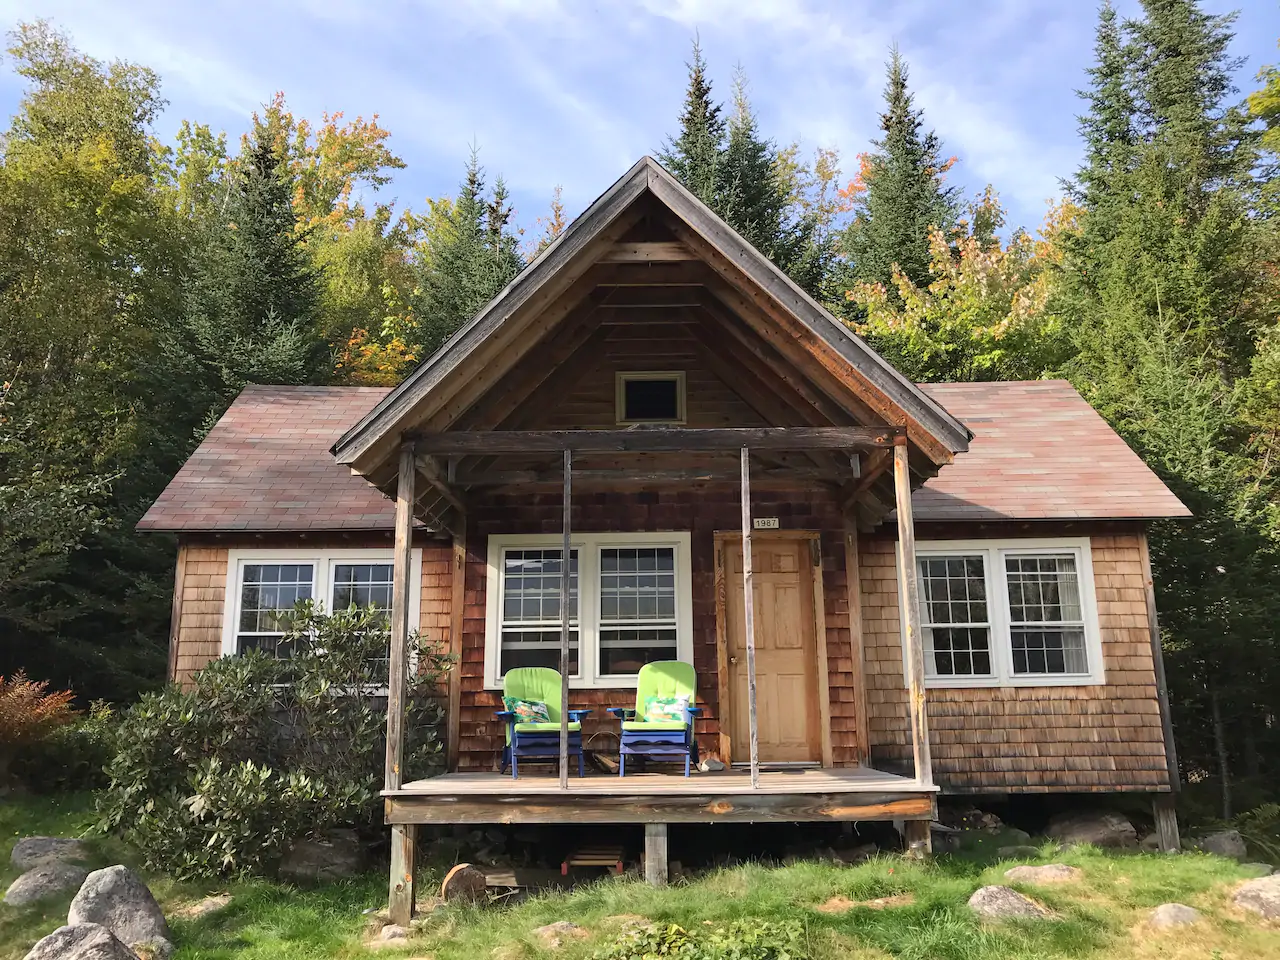 Mountain cabin with porch with 2 chairs